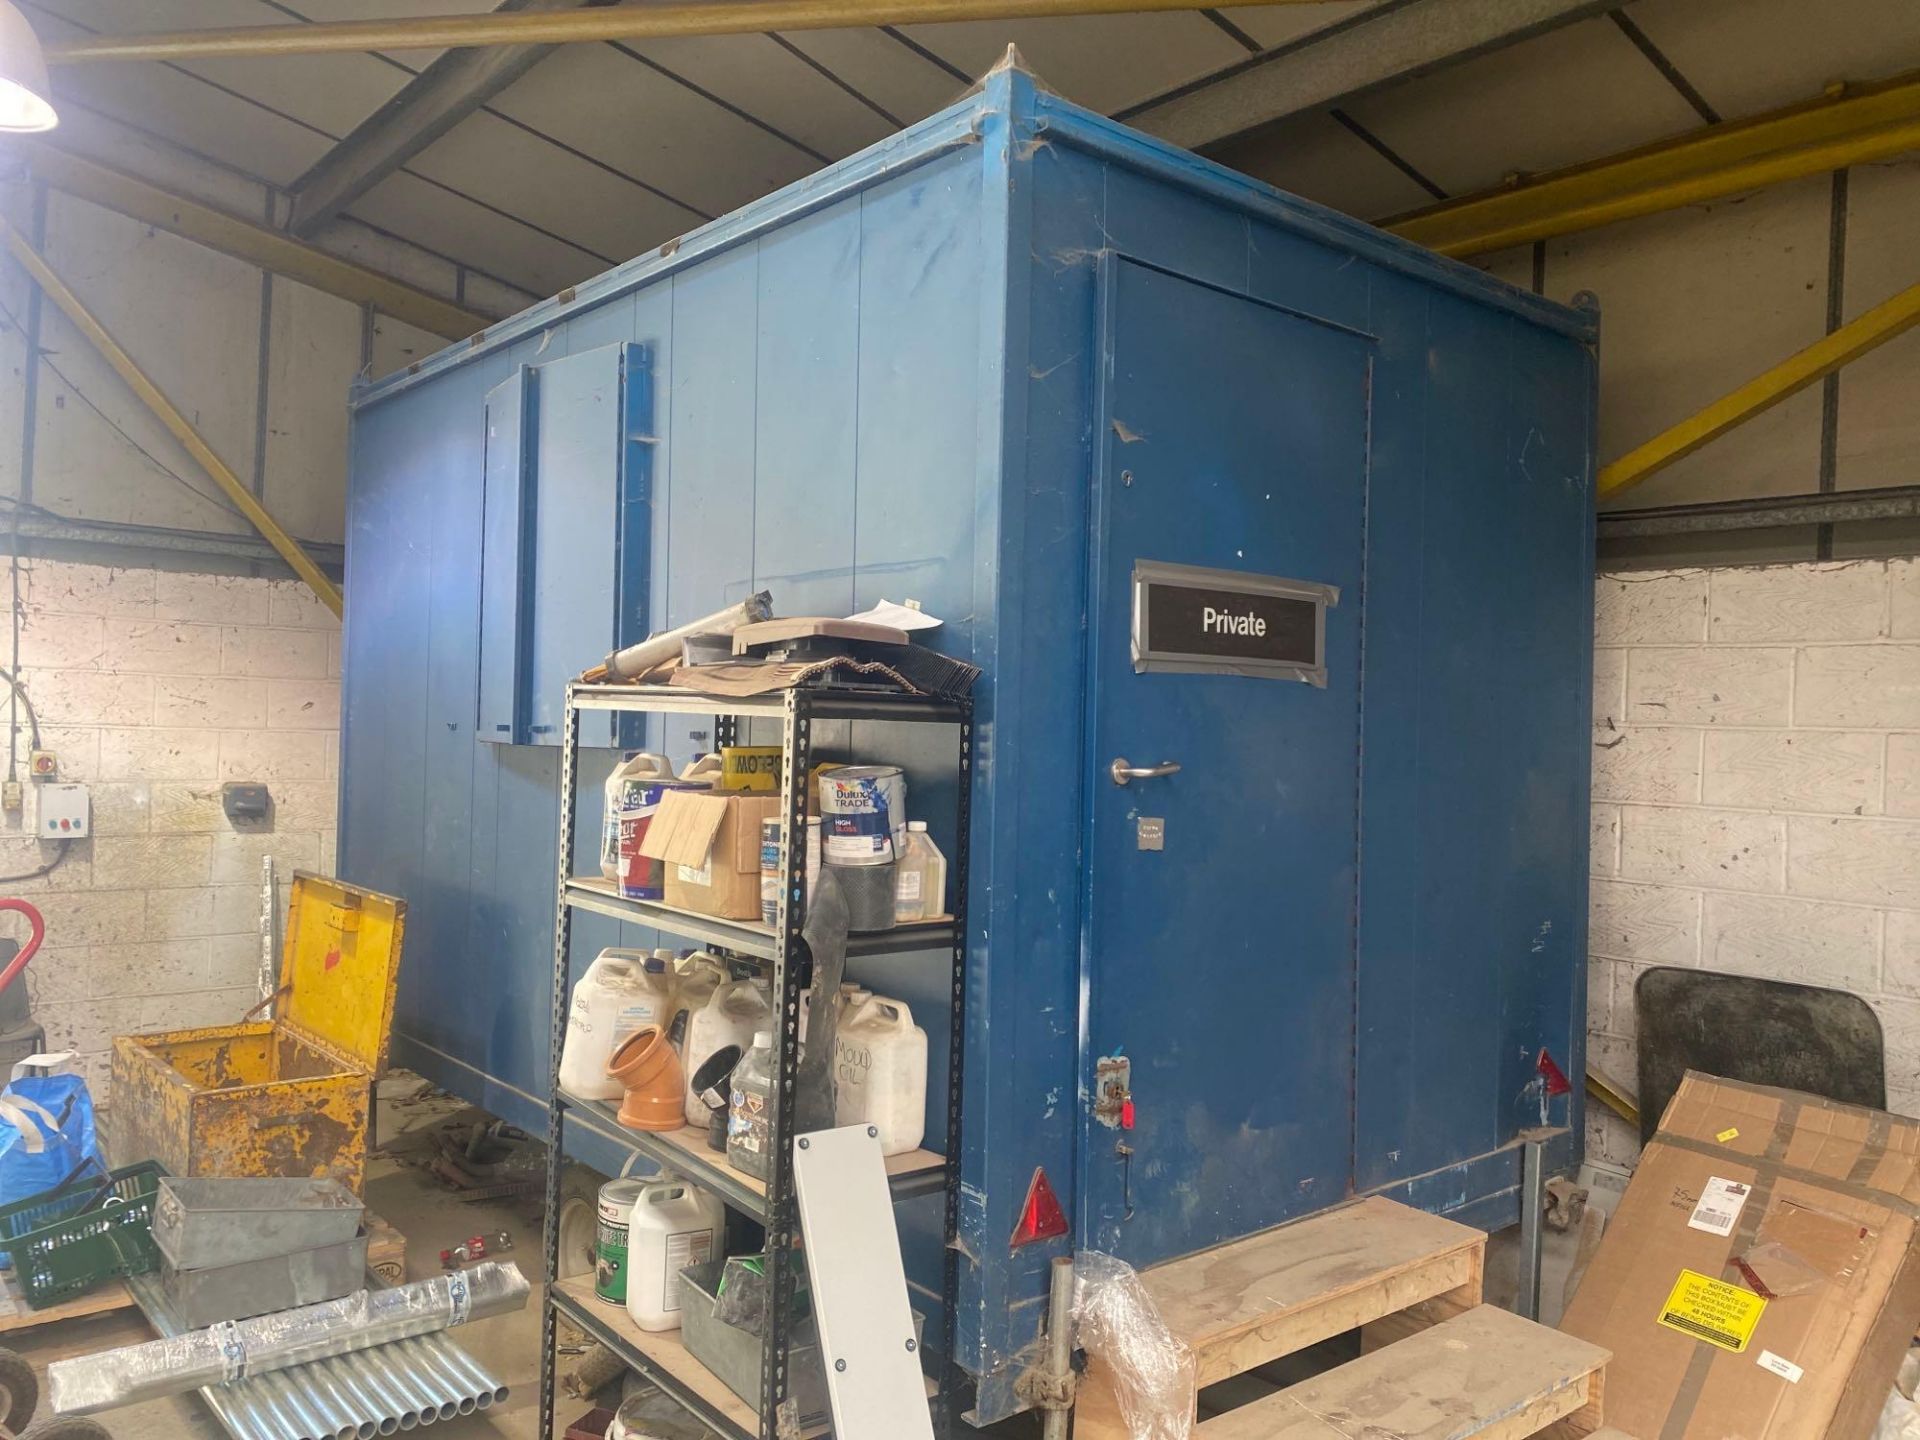 12.5‘ x 7.5‘ mobile office unit complete with towing trailer, access steps and 240 V plug-in mains..